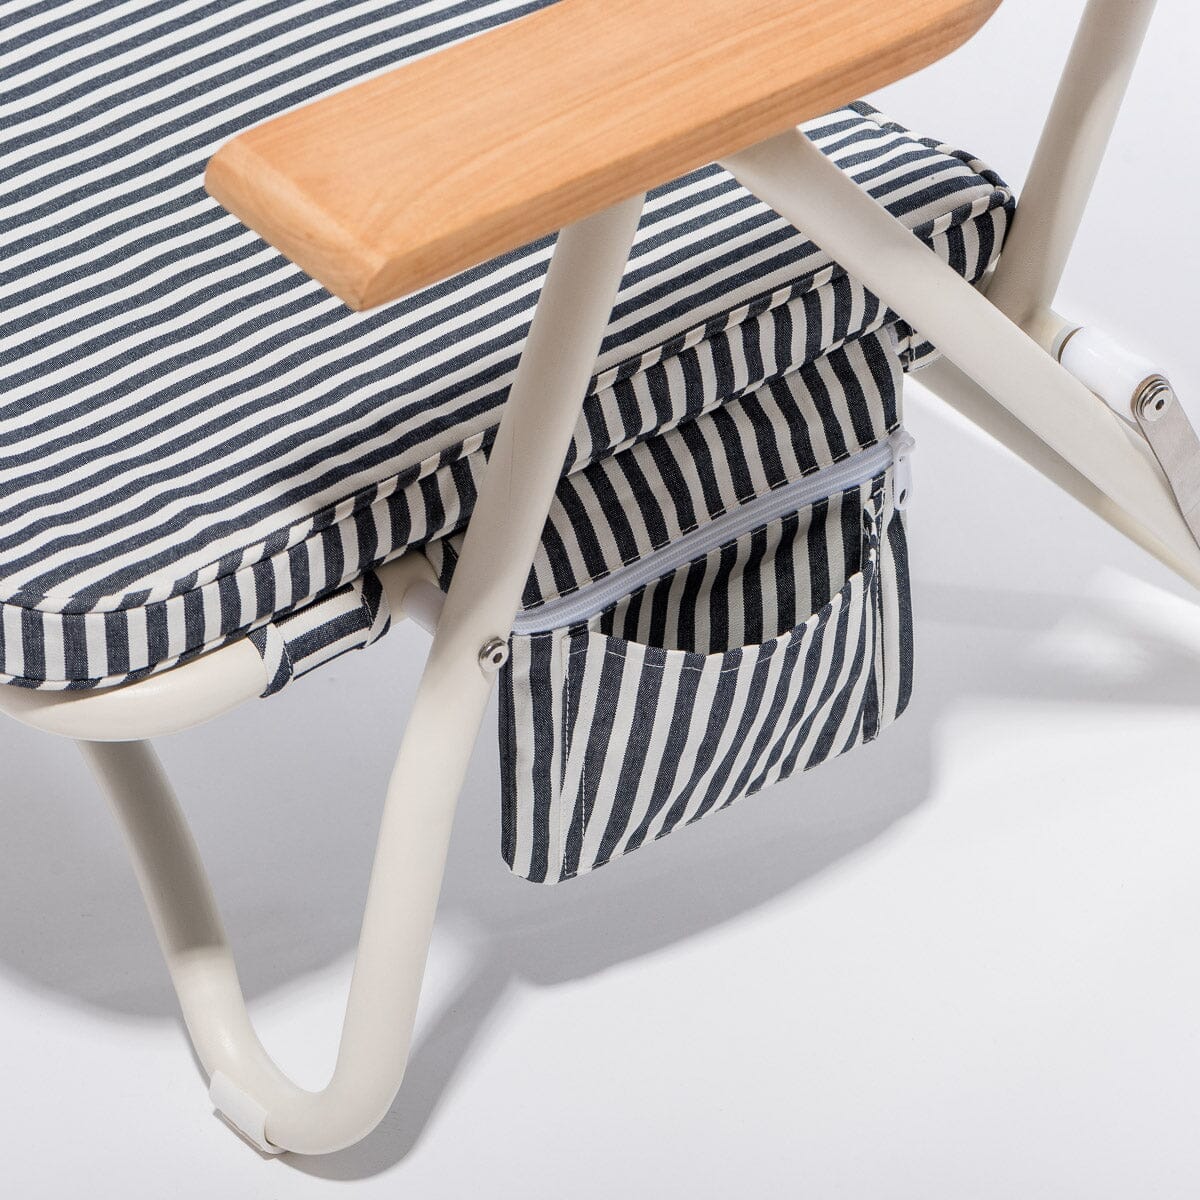 The Pam Chair - Laurens Navy Stripe Pam Chair Business & Pleasure Co 